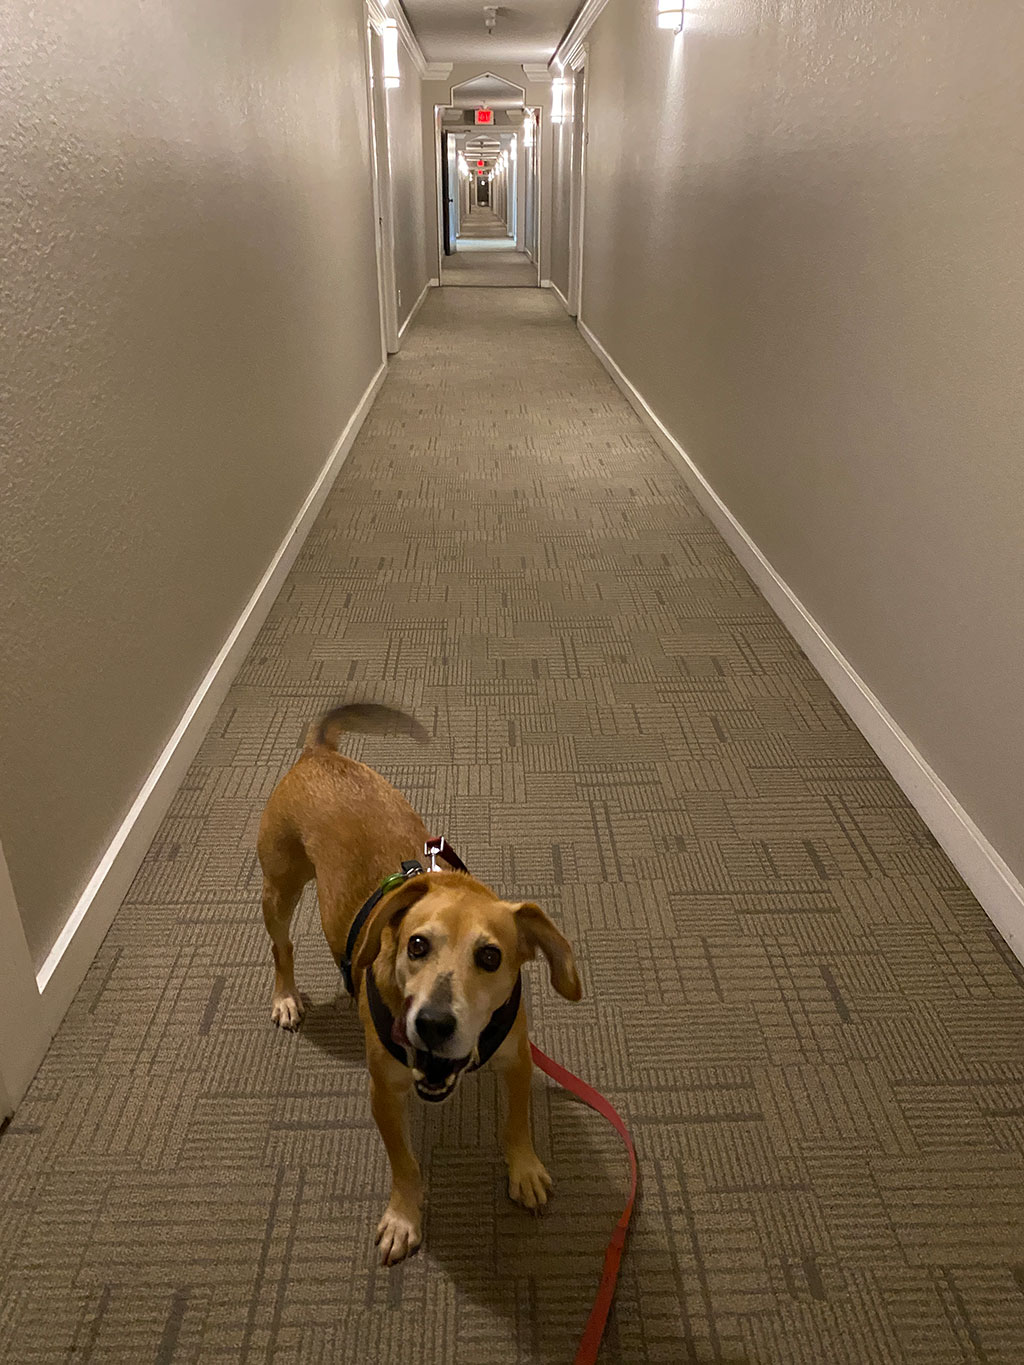 Kalbi (my dog) wagging his tail in the hallway of my building outside my door.